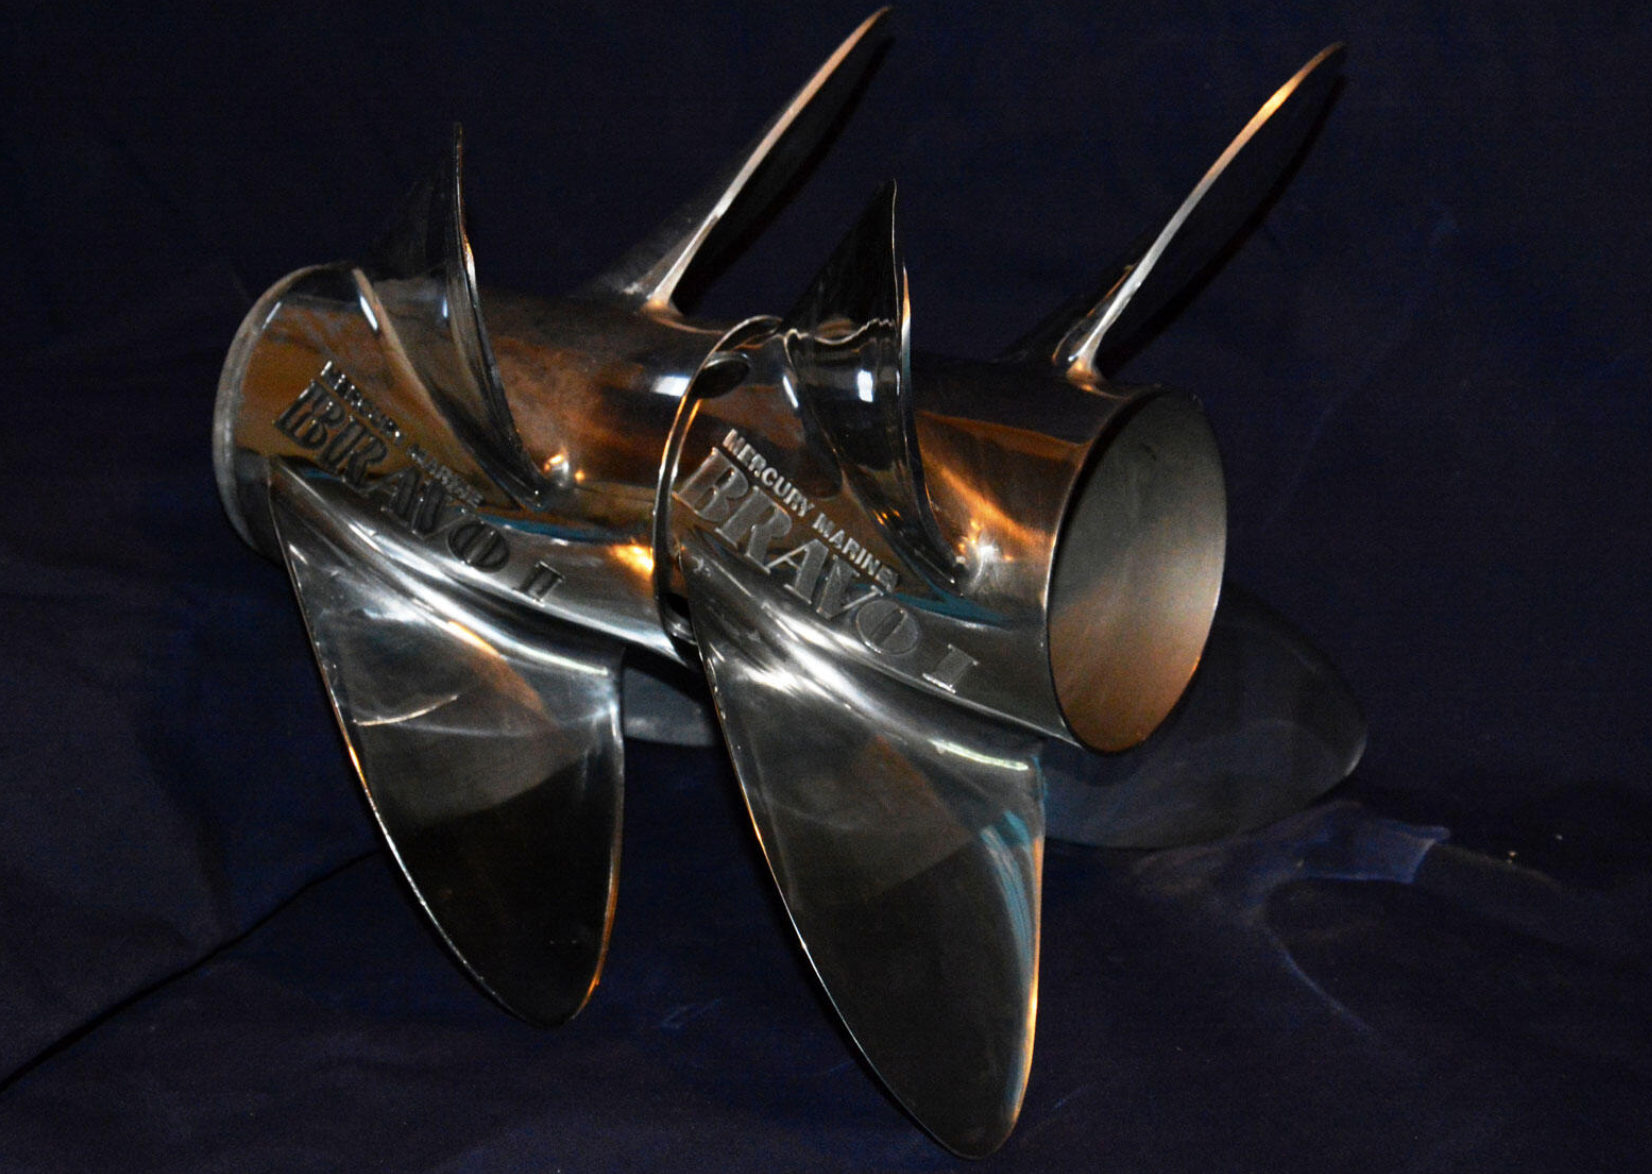 Mercury Bravo One propellers, four-blade props, stainless-steel props